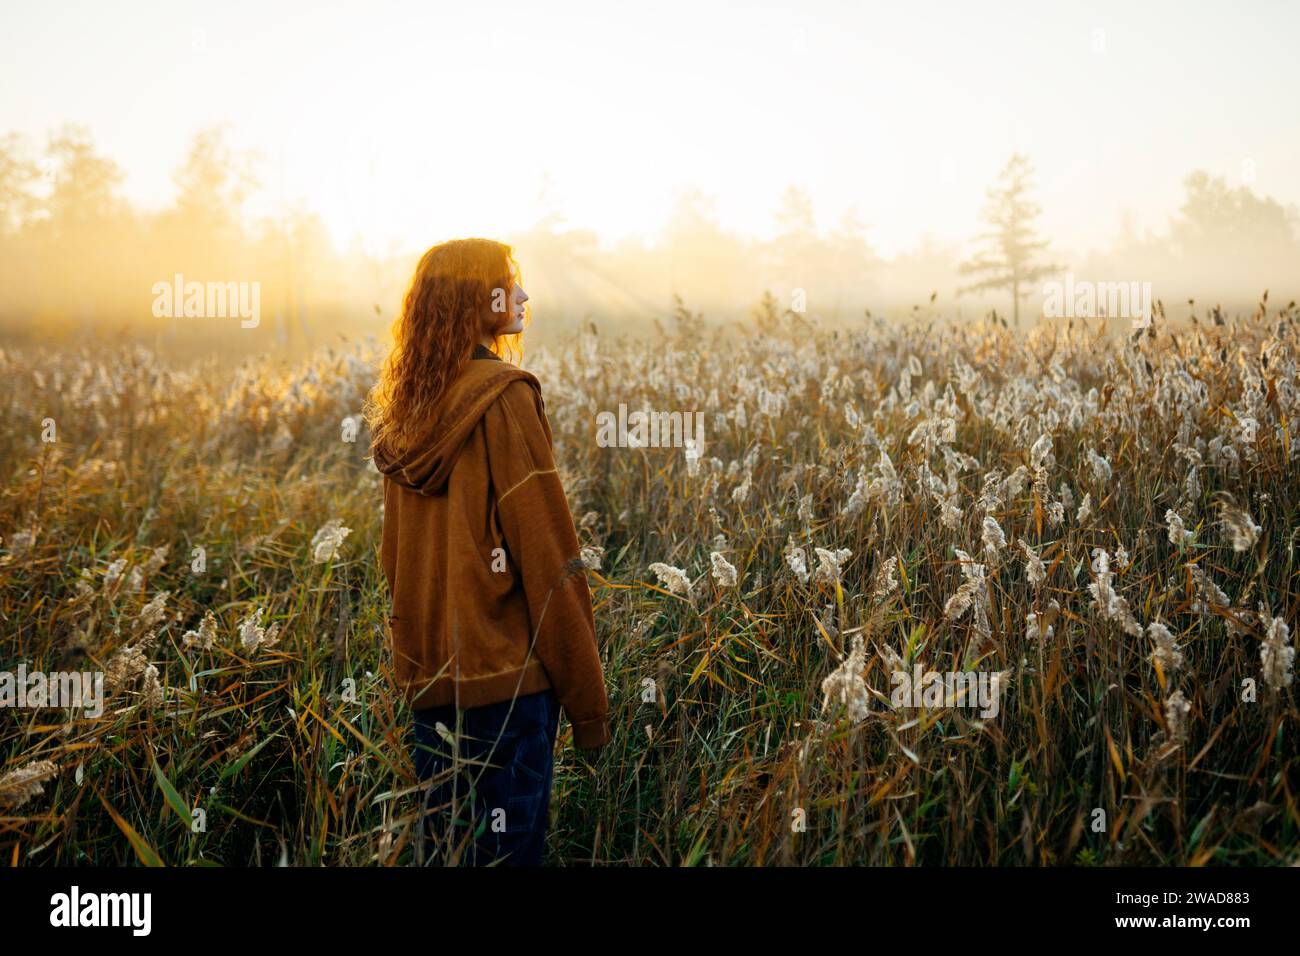 Rear view of woman standing in field at sunrise Stock Photo